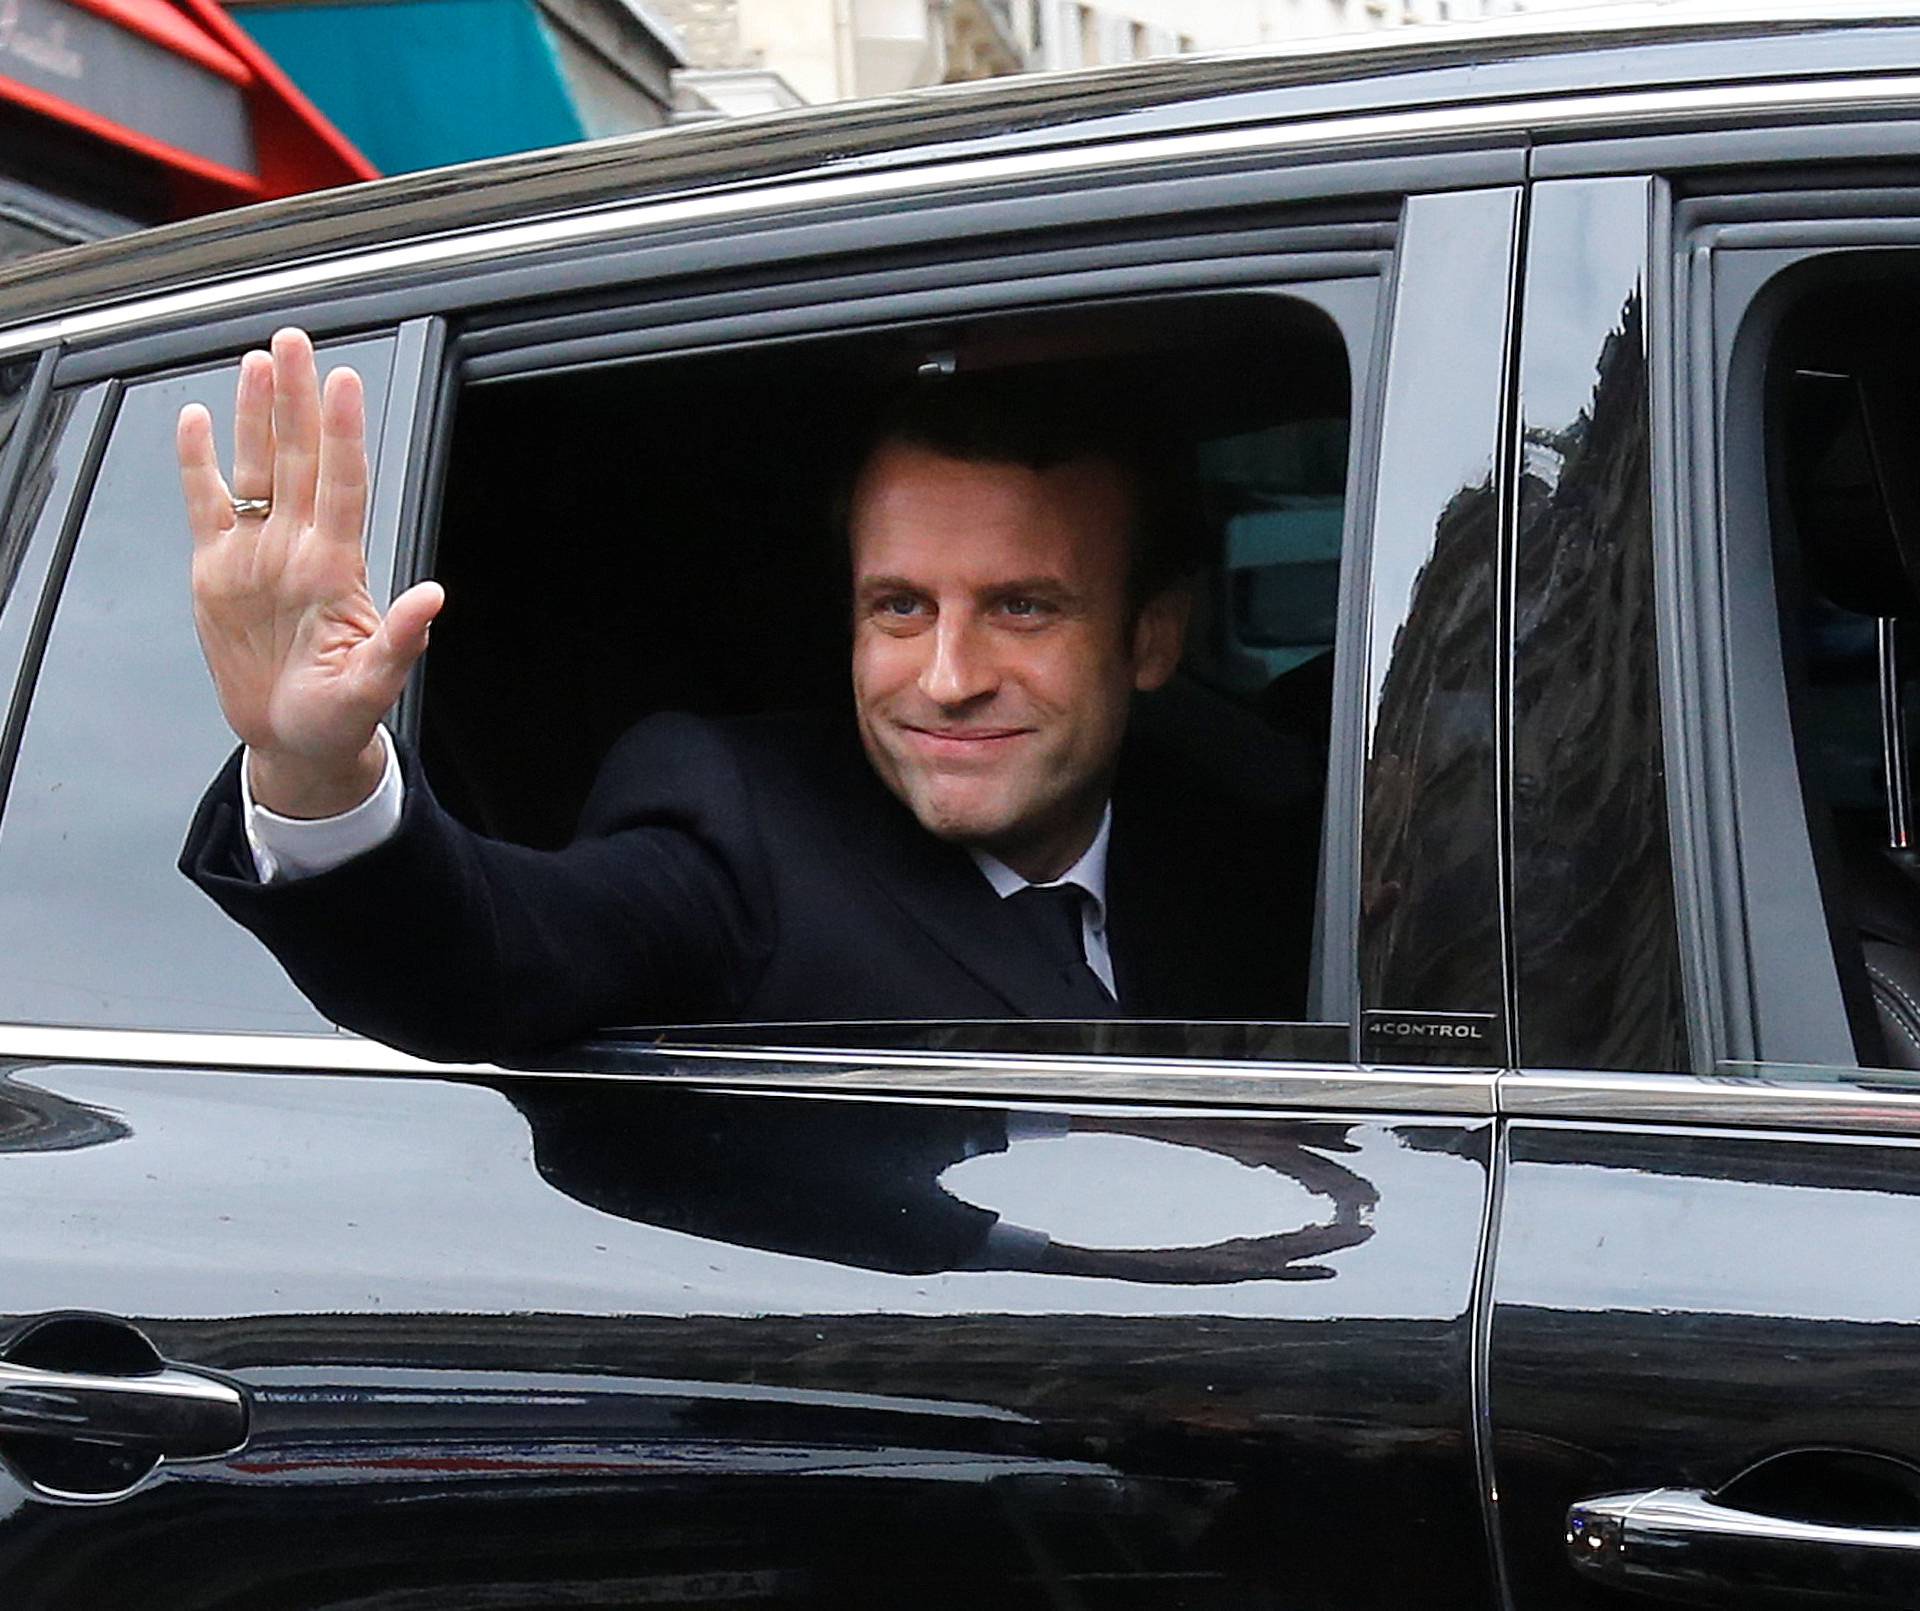 Emmanuel Macron, head of the political movement En Marche !, or Onwards !, and candidate for the 2017 presidential election, waves from his car as he leaves his home during the second round of the election, in Paris